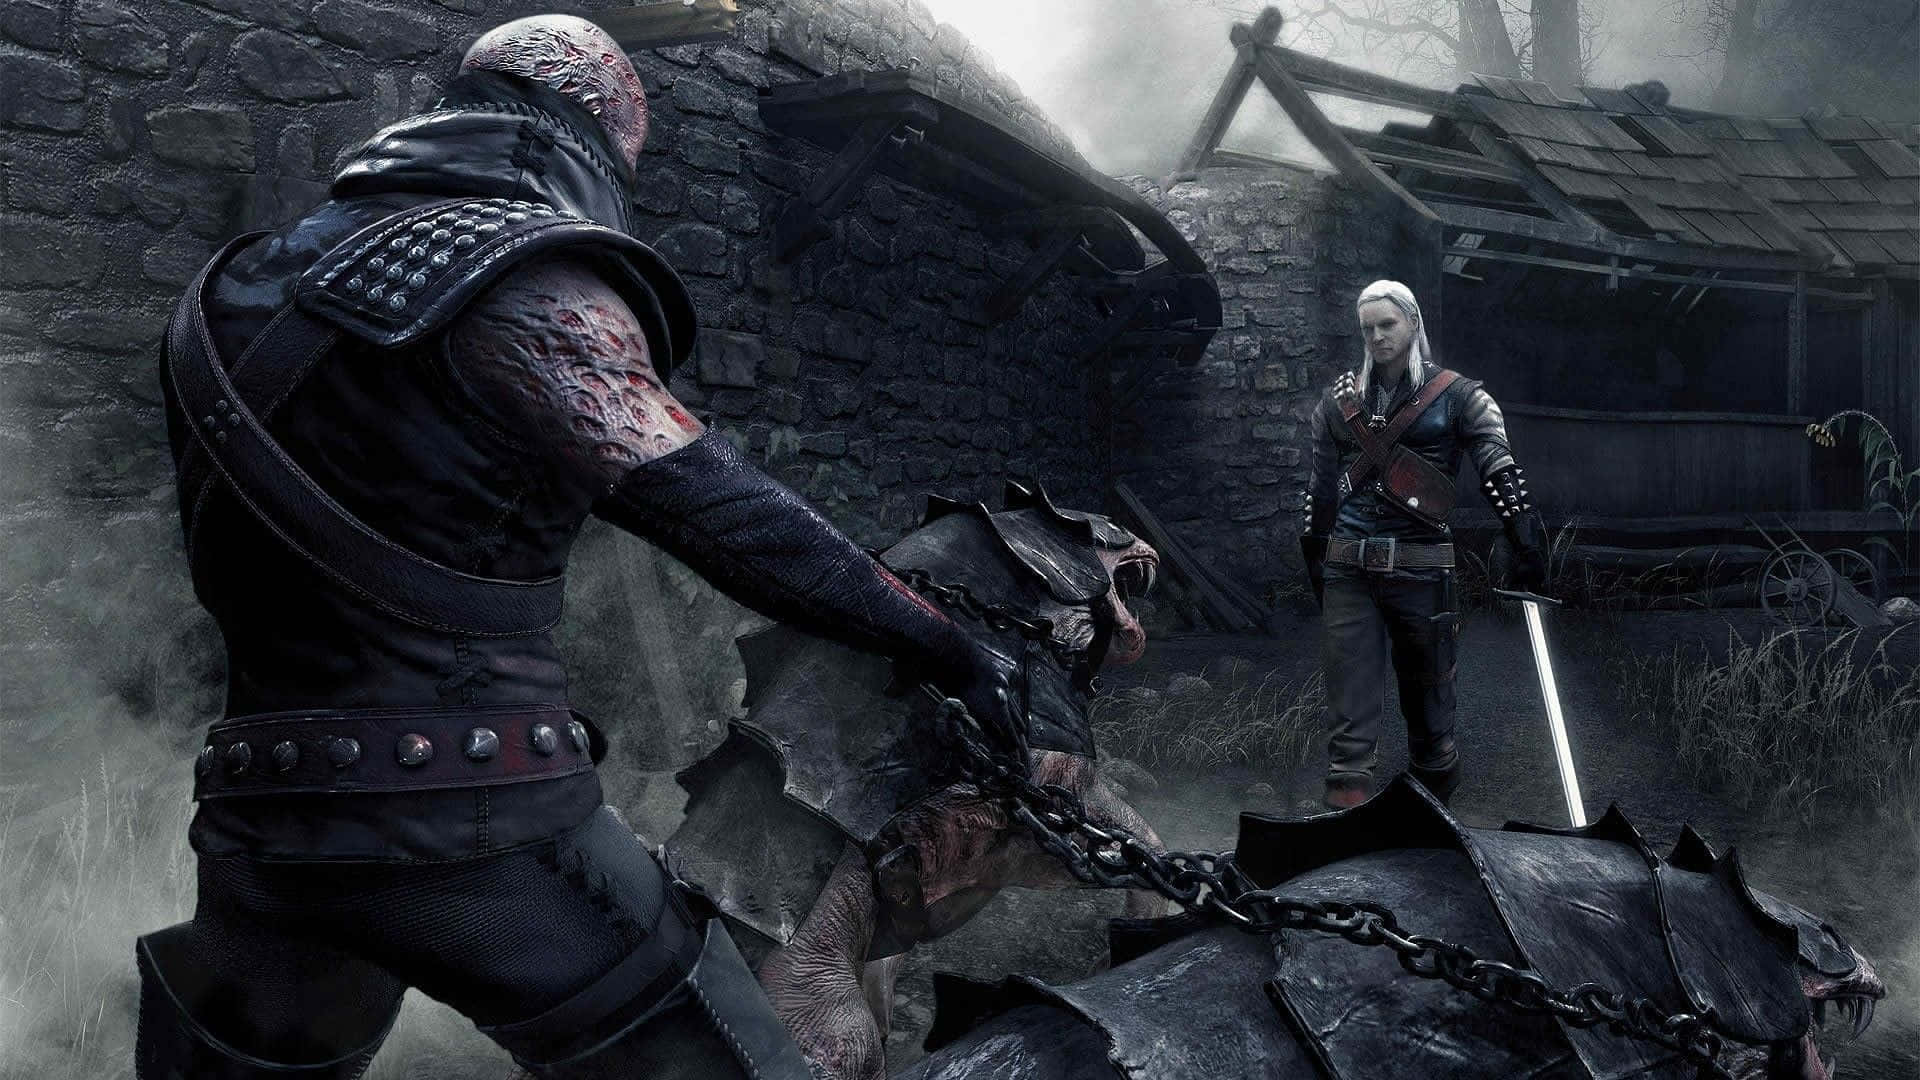 The Witcher 1920x1080 1920 X 1080 Wallpaper